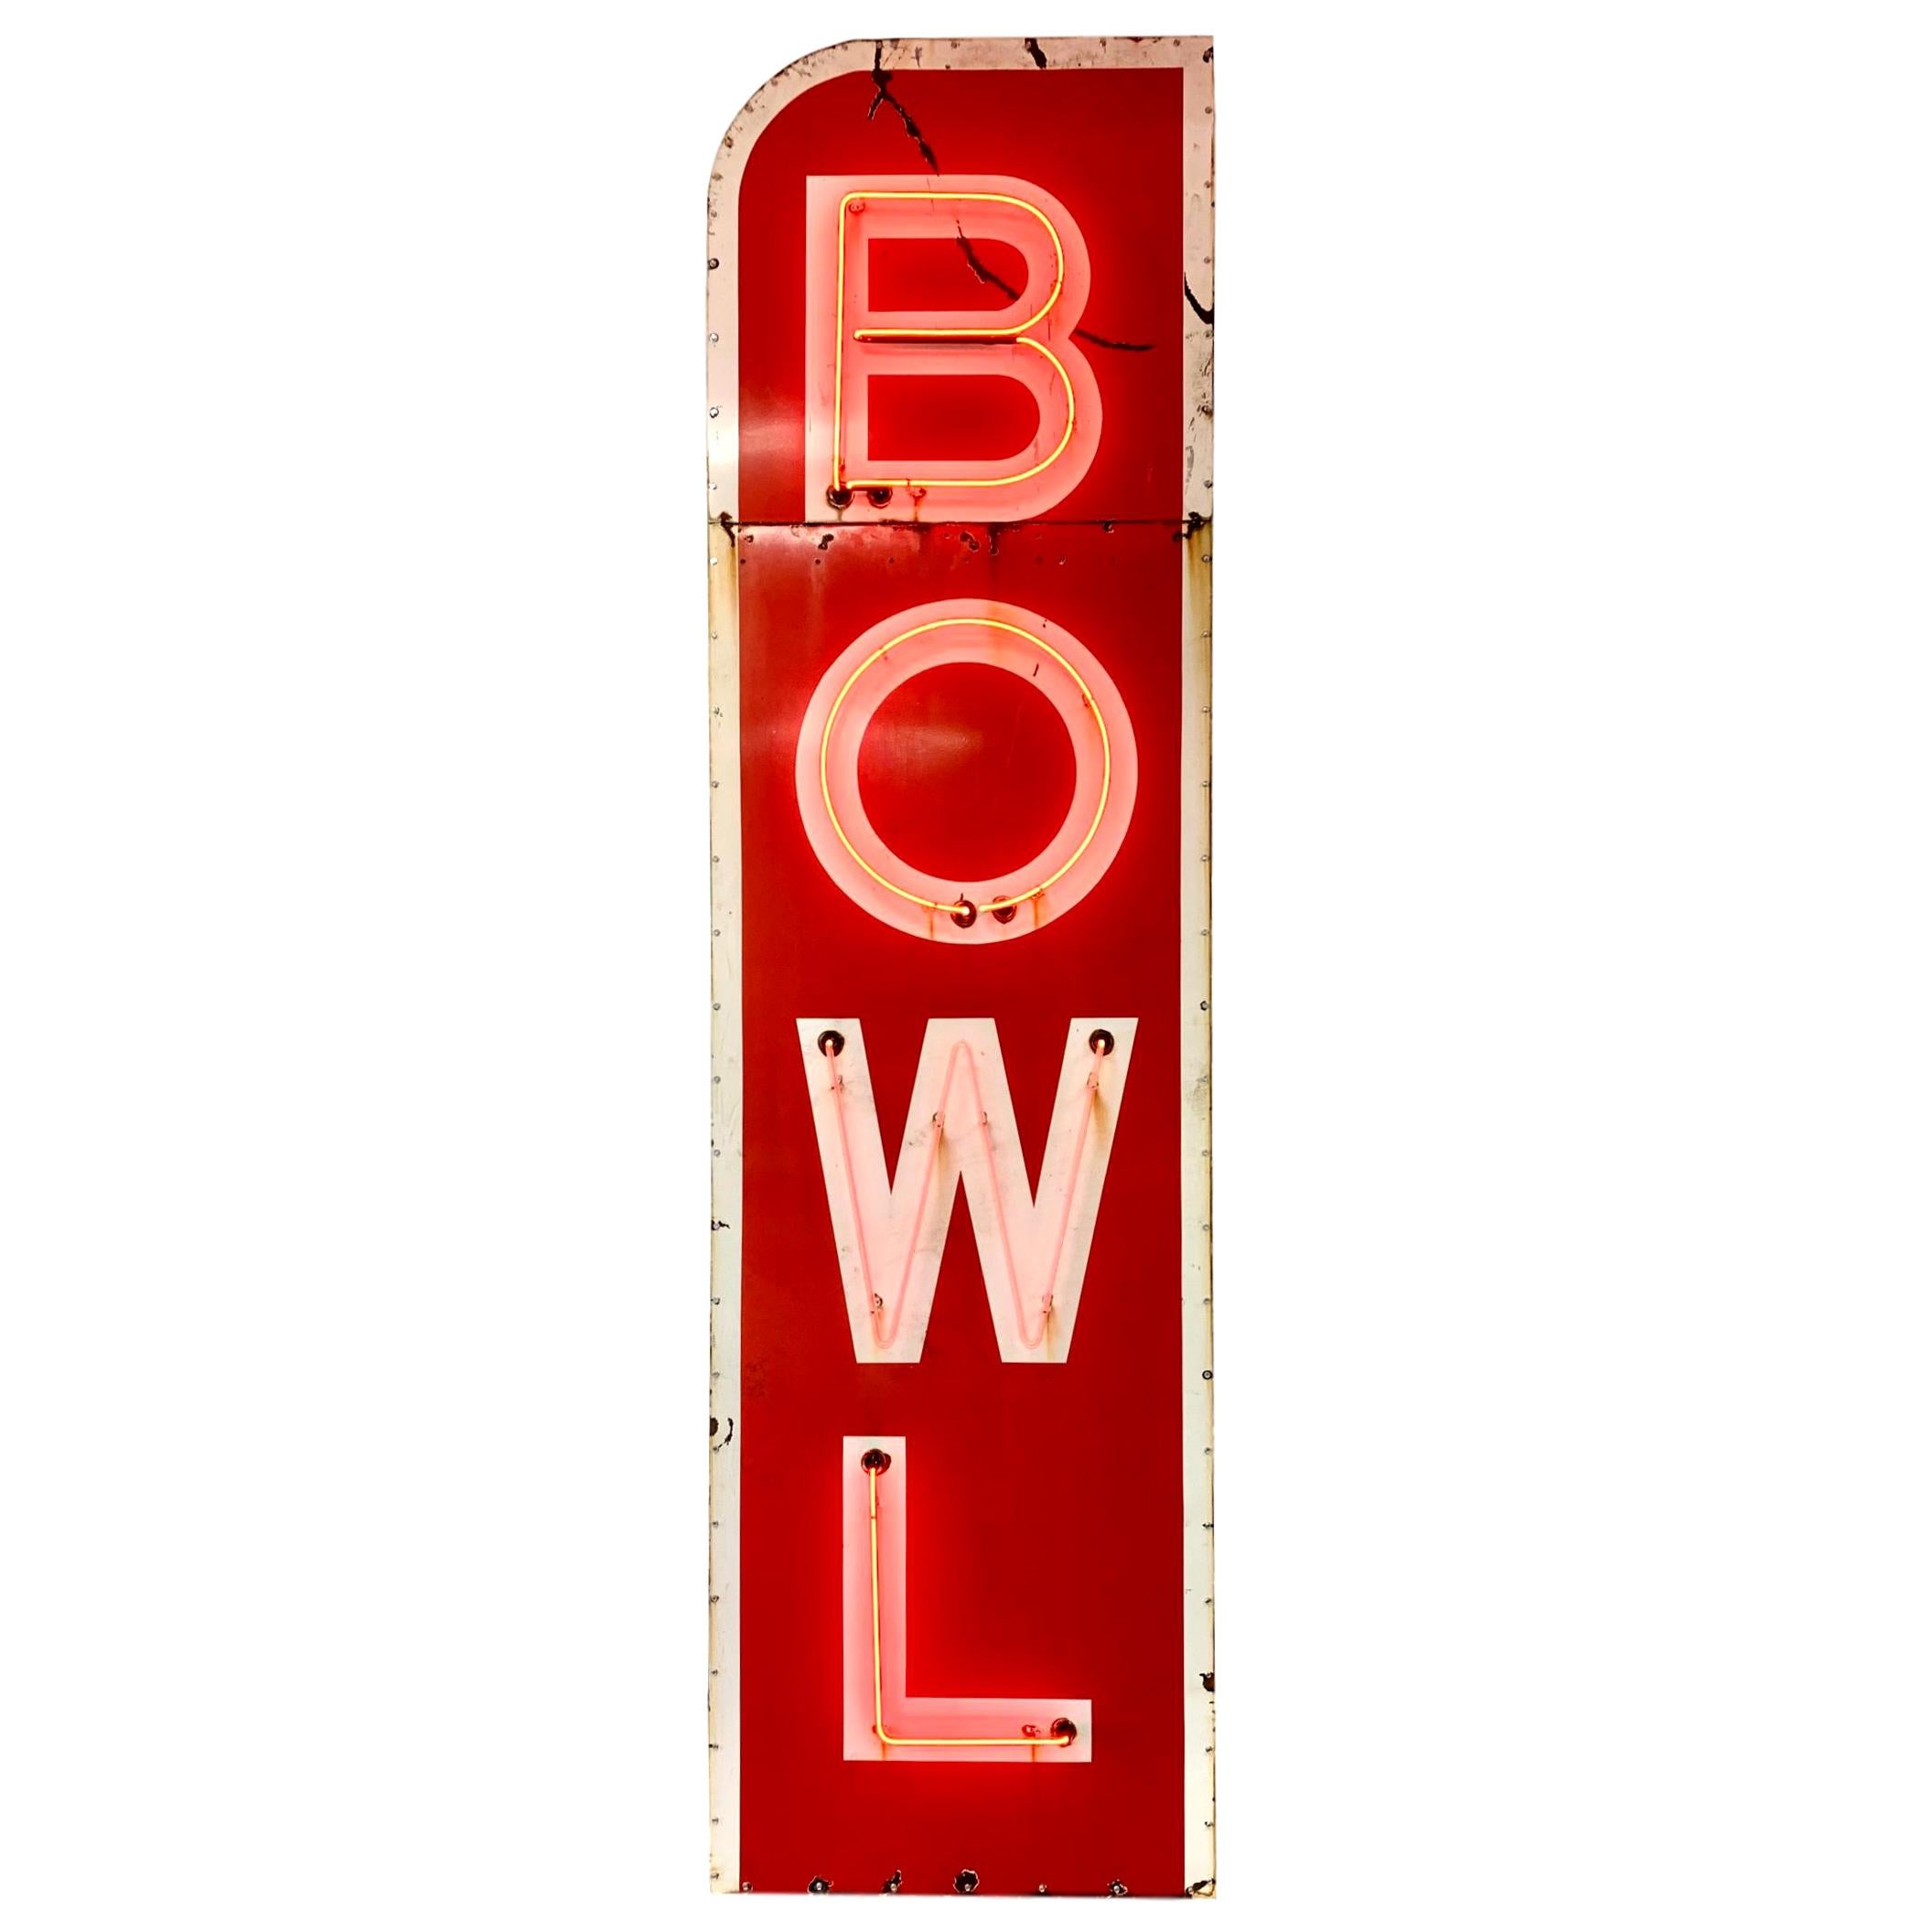 12.5 Foot Tall Vintage Neon Bowling Sign For Sale